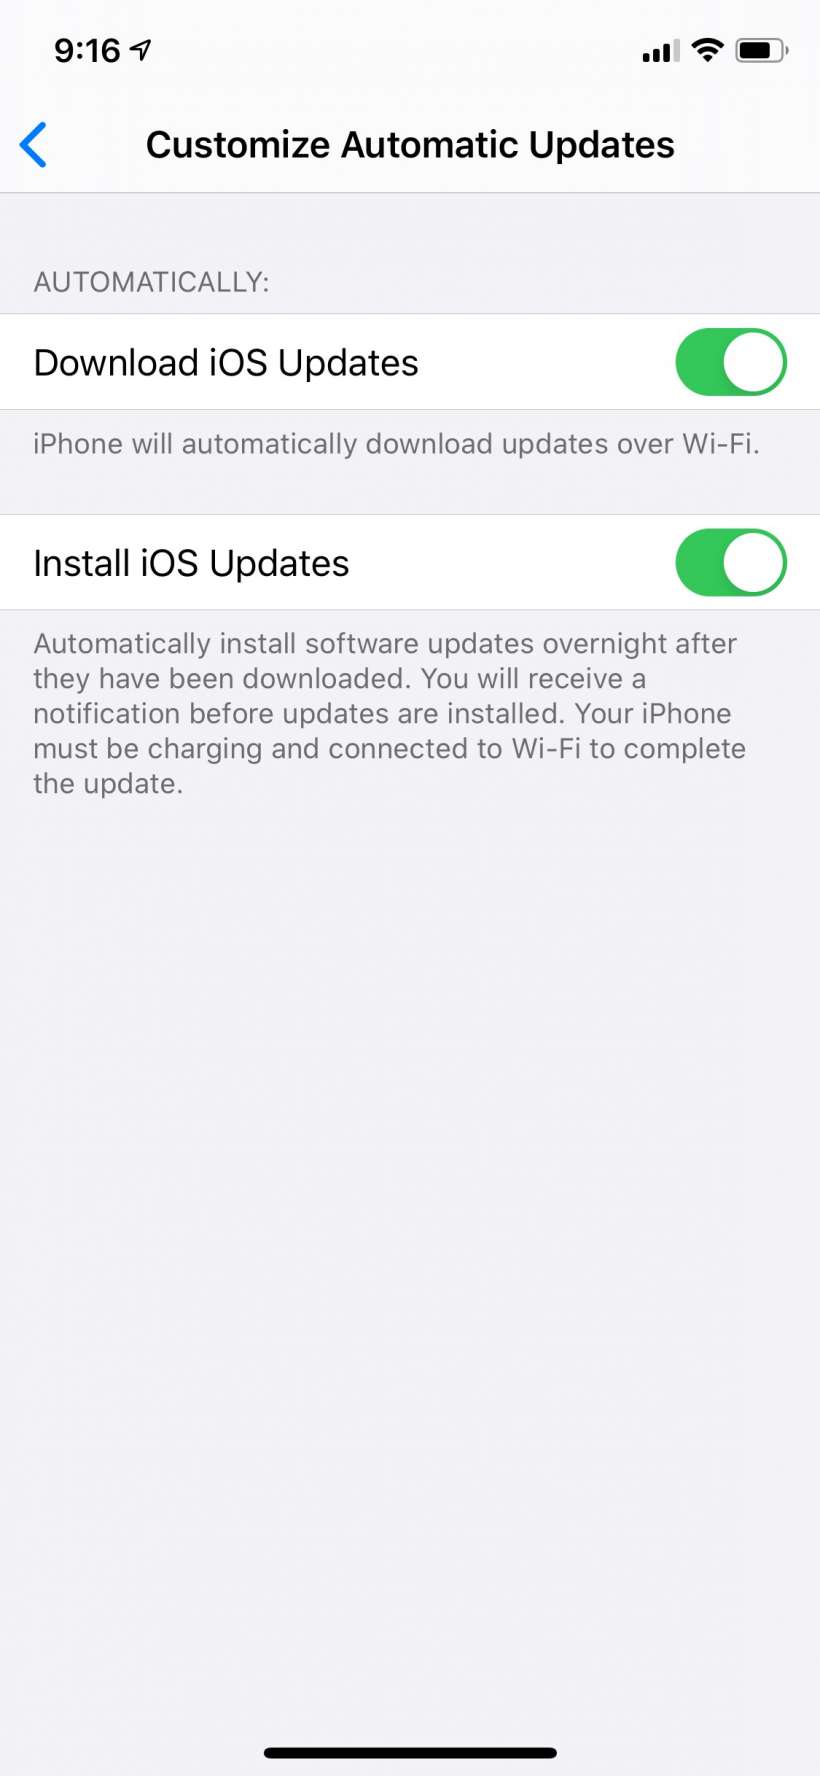 How to customize your automatic iOS updates on iPhone and iPad.